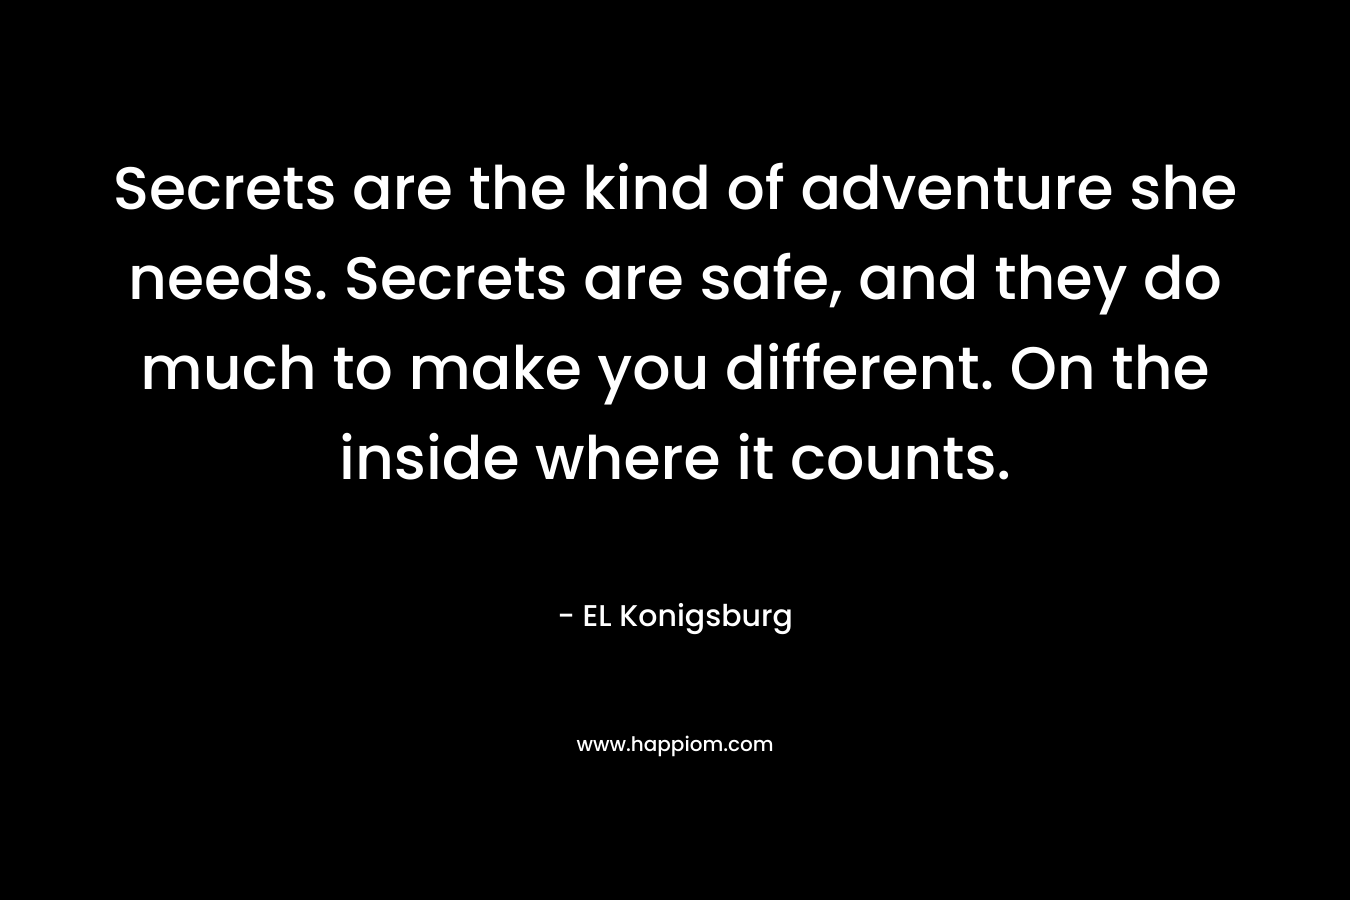 Secrets are the kind of adventure she needs. Secrets are safe, and they do much to make you different. On the inside where it counts. – EL Konigsburg